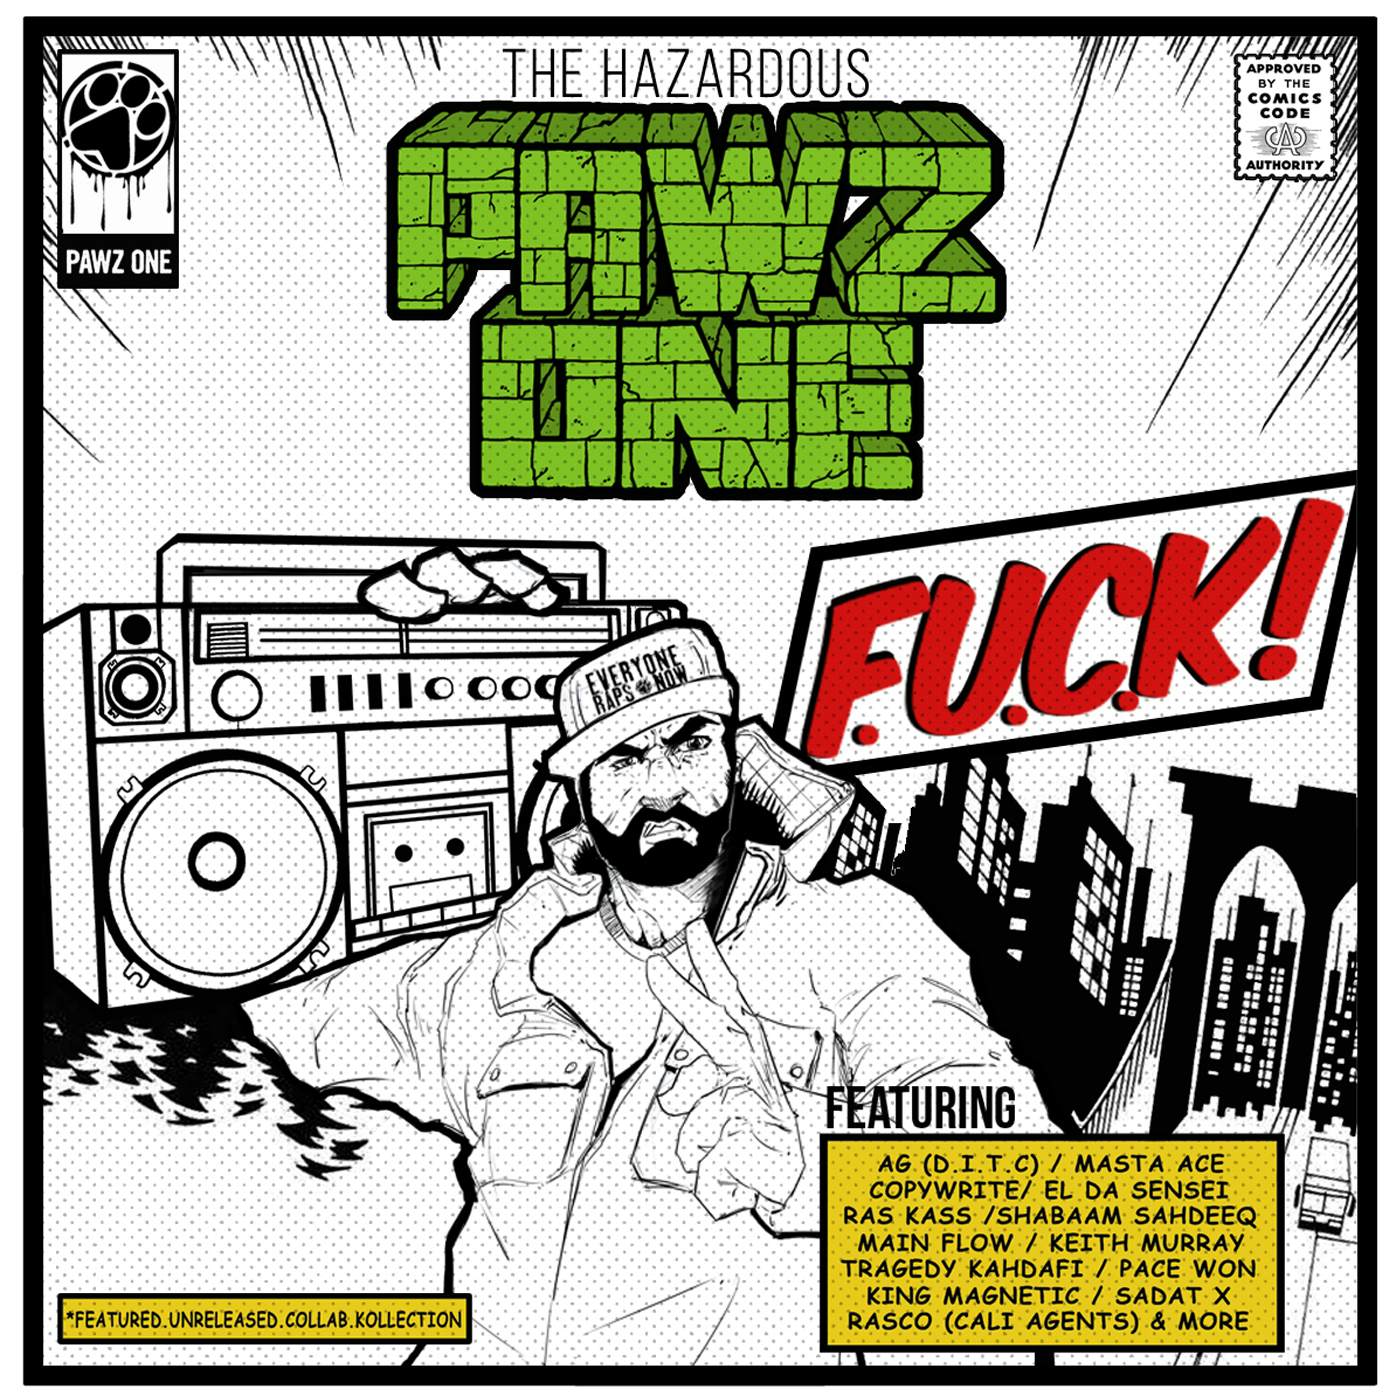 Pawz One F.U.C.K. (FEATURED UNRELEASED COLLAB KOLLECTION) CD